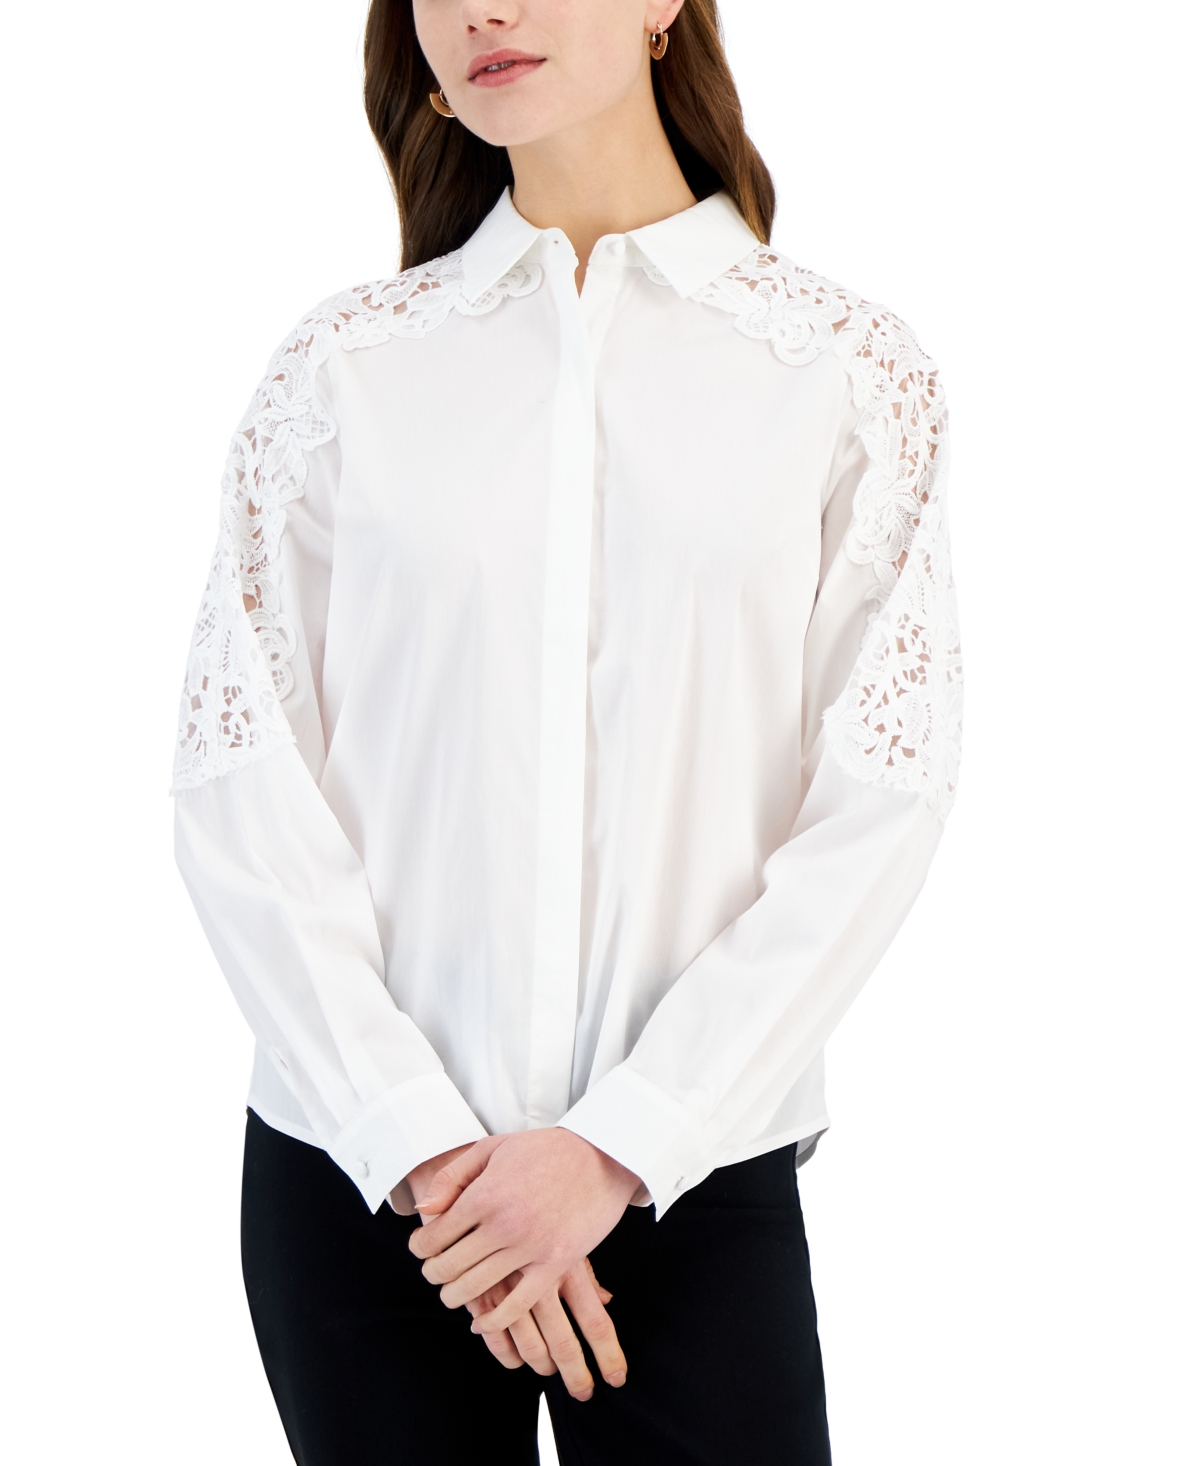 Women's Lace Sleeve Button-Down Top - White Star Lace